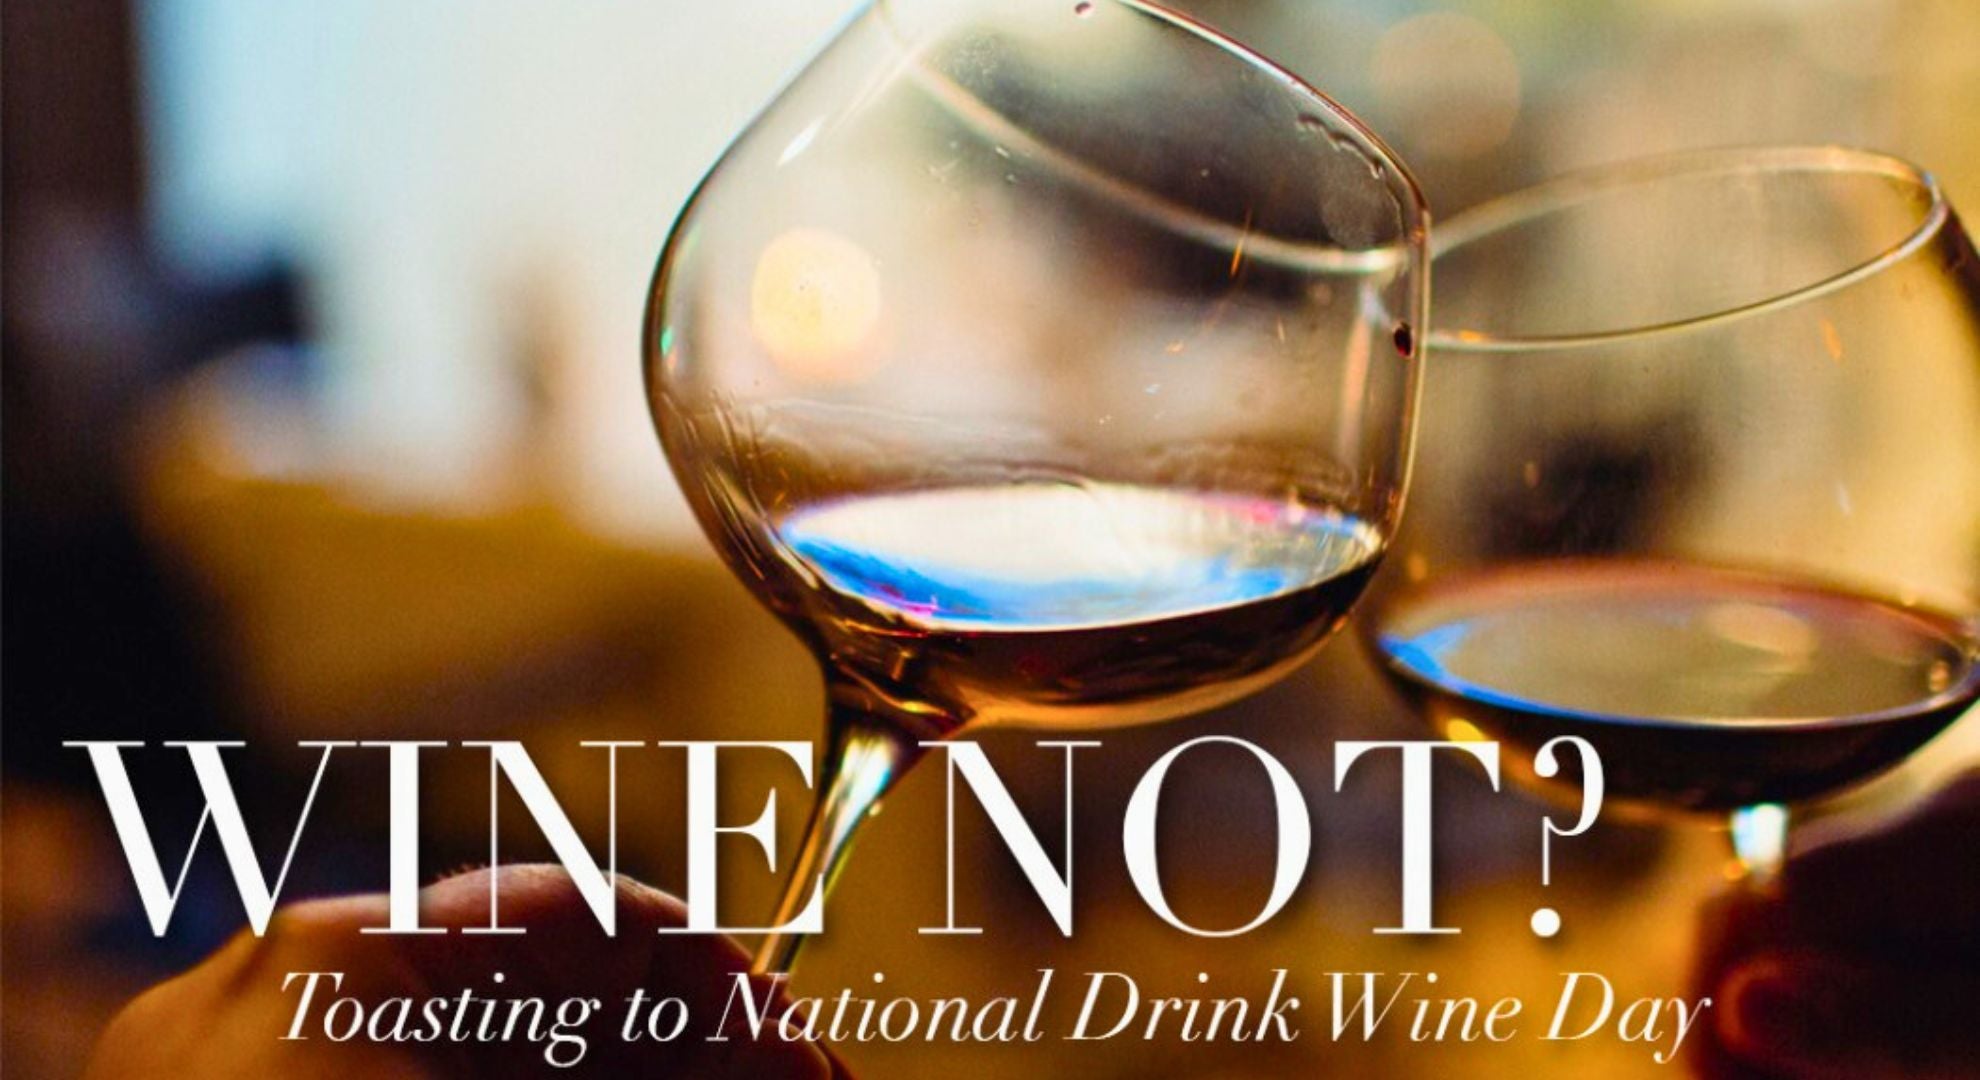  A Guide to National Drink Wine Day